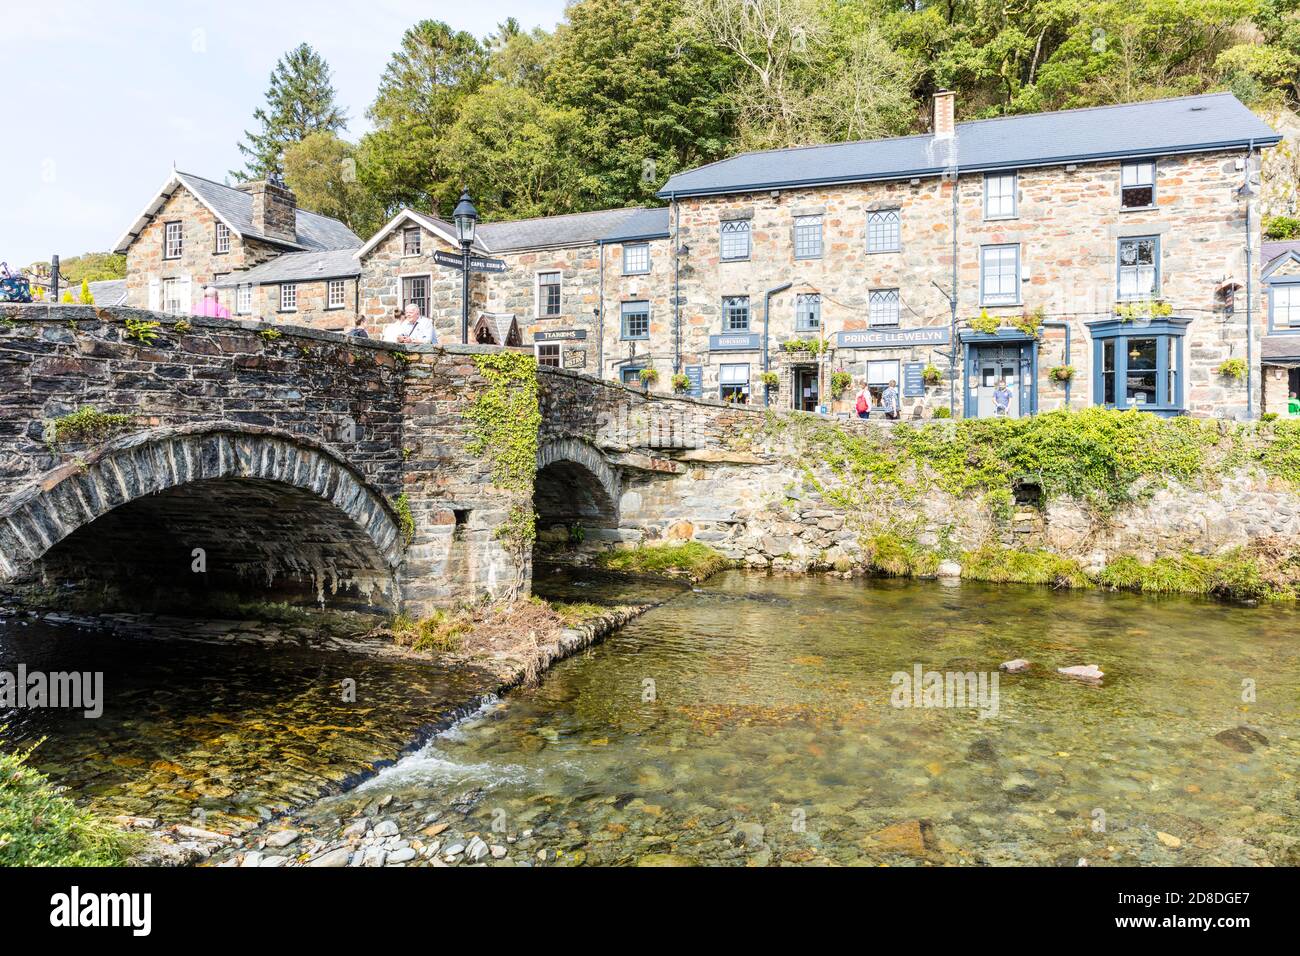 Beddgelert, Wales, UK, Beddgelert Snowdonia, Beddgelert, Wales, UK stands in a valley at the confluence of the River Glaslyn and River Colwyn Stock Photo